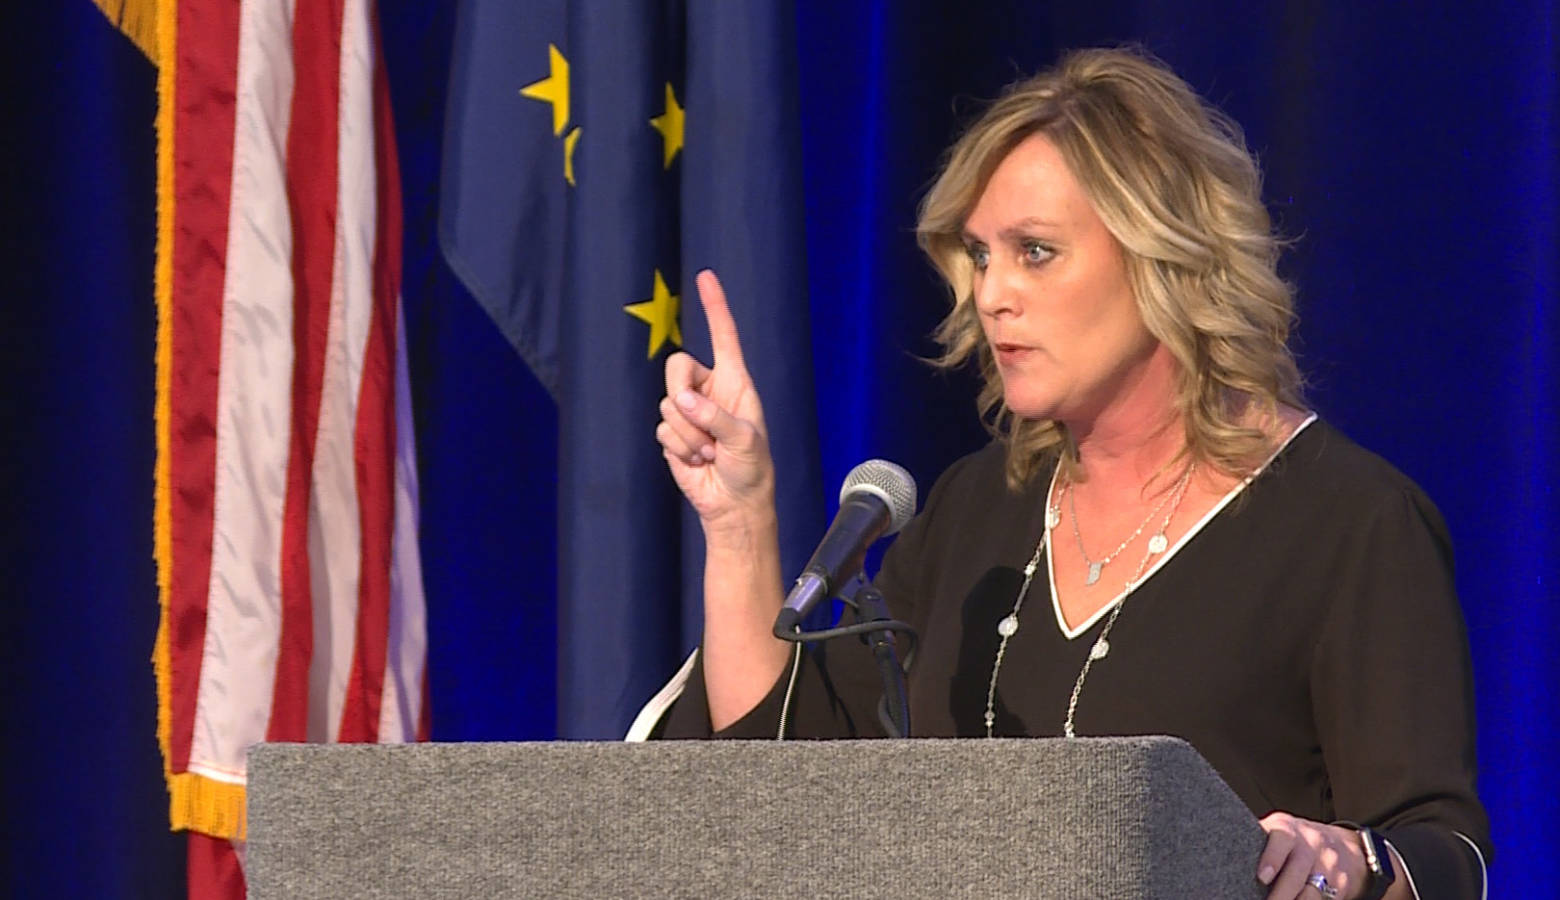 State Superintendent of Public Instruction Jennifer McCormick took office in 2017 and will be the last elected official to oversee the Indiana Department of Education. (Jeanie Lindsay/IPB News)